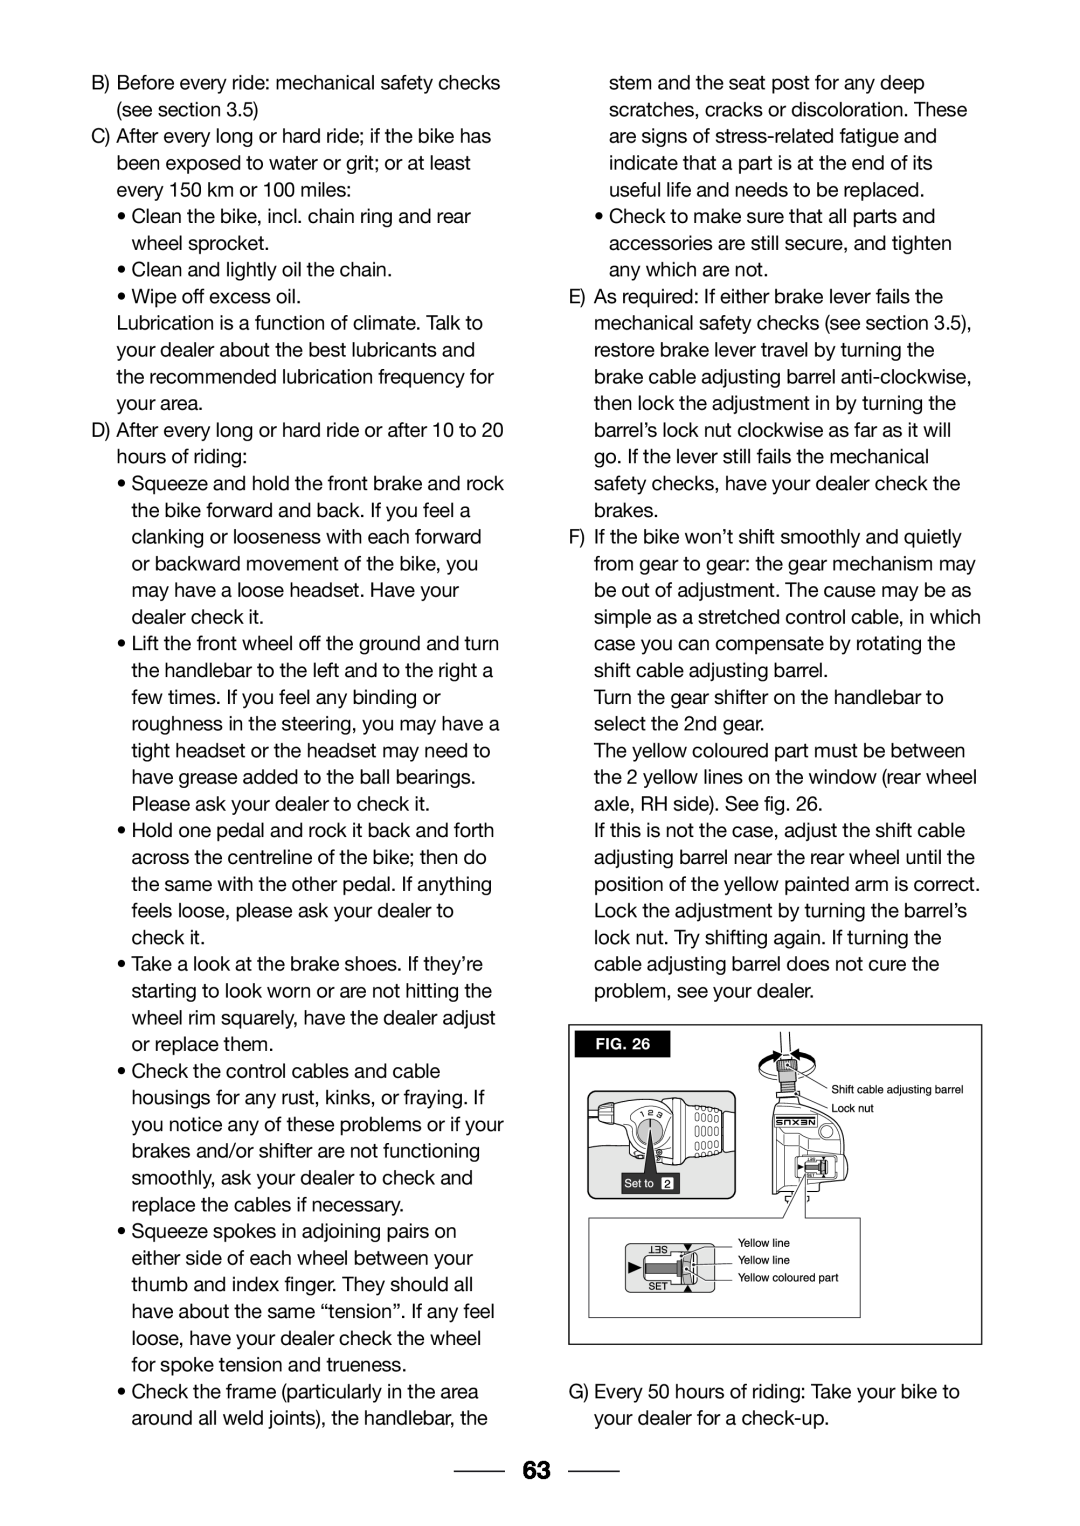 Giant 2002 Motorized Bicycle owner manual B Before every ride mechanical safety checks see section 